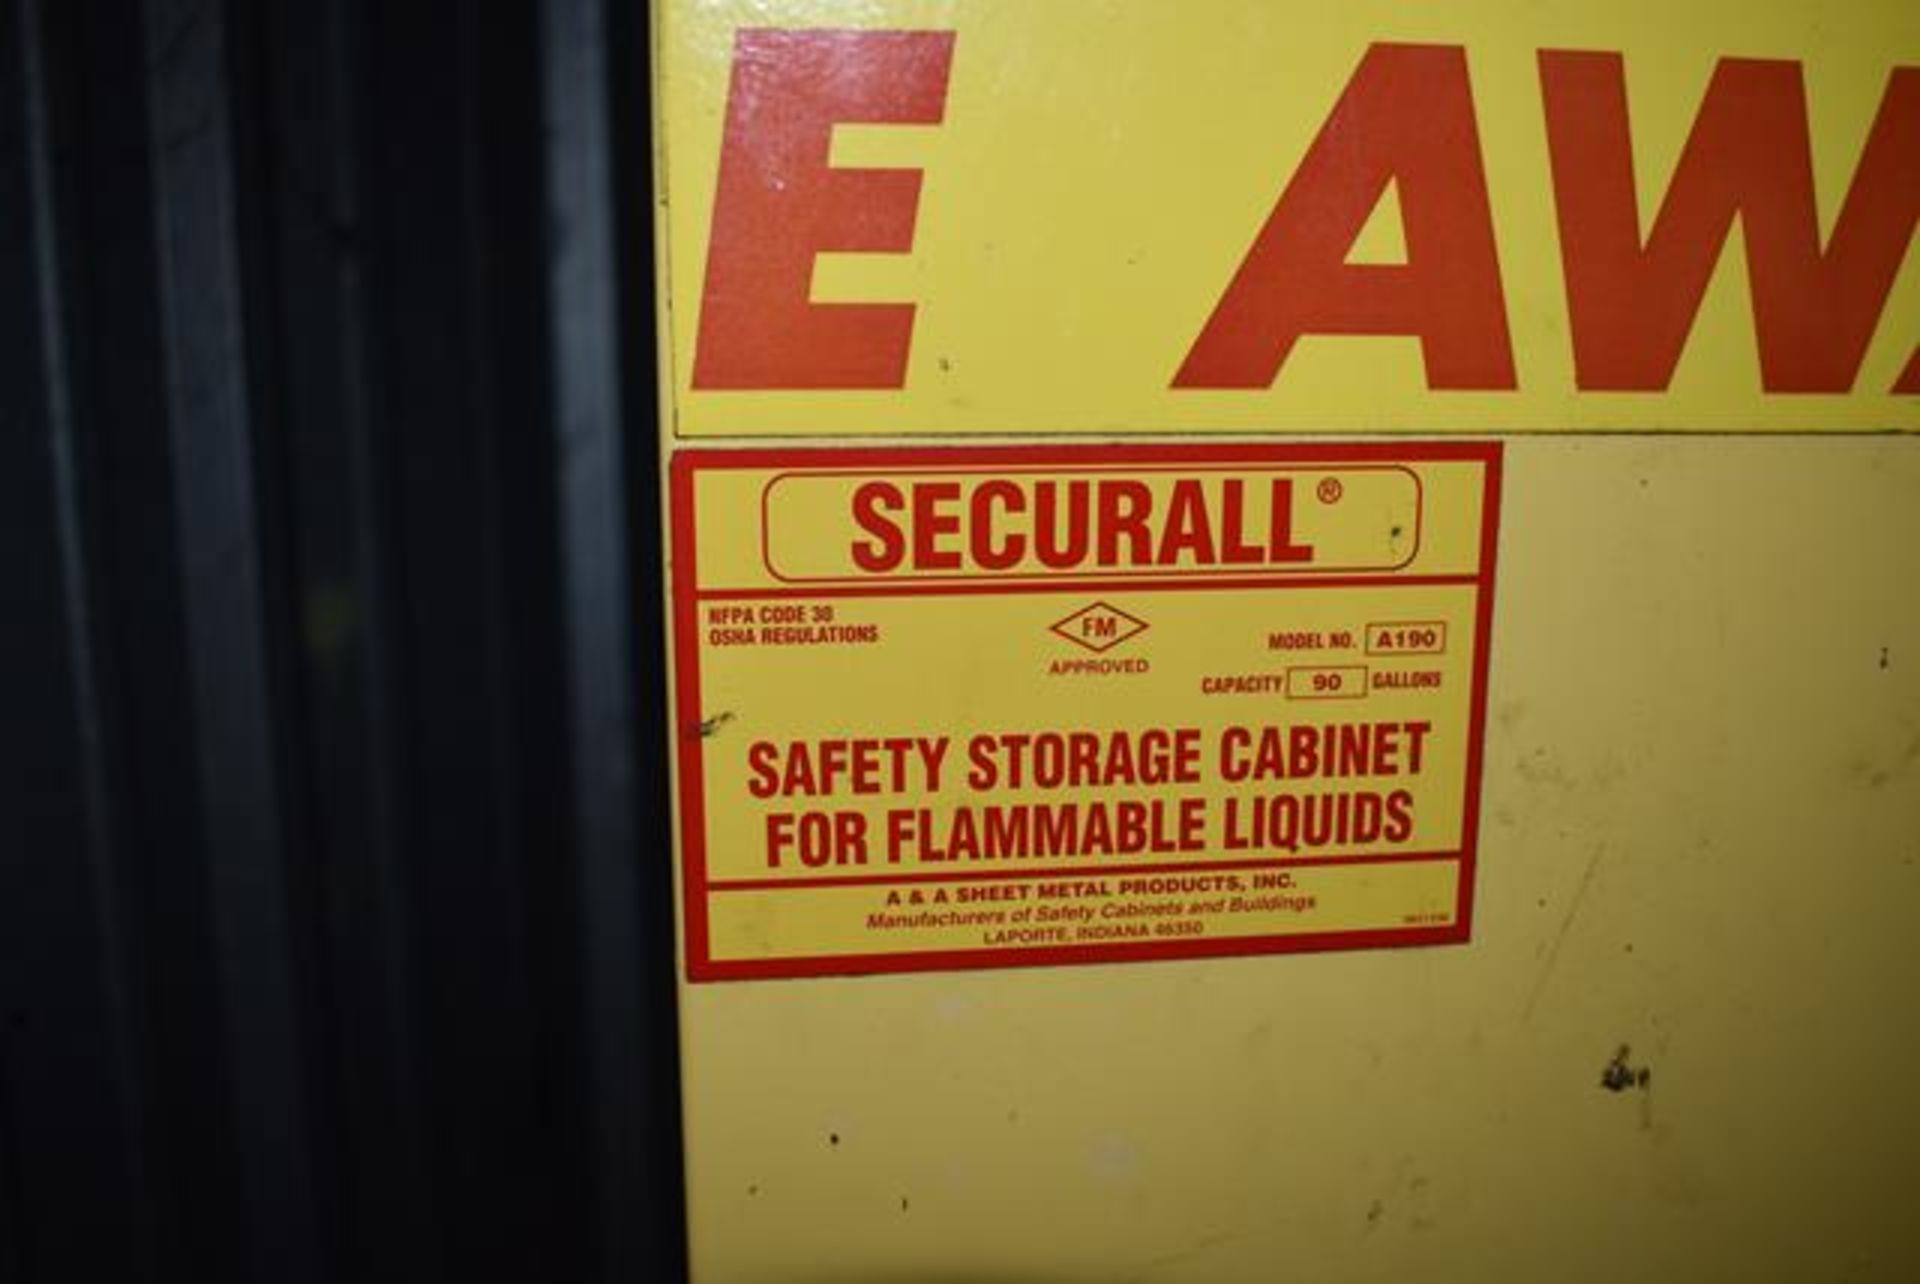 Securall Model #A190 Safety Storage Cabinet